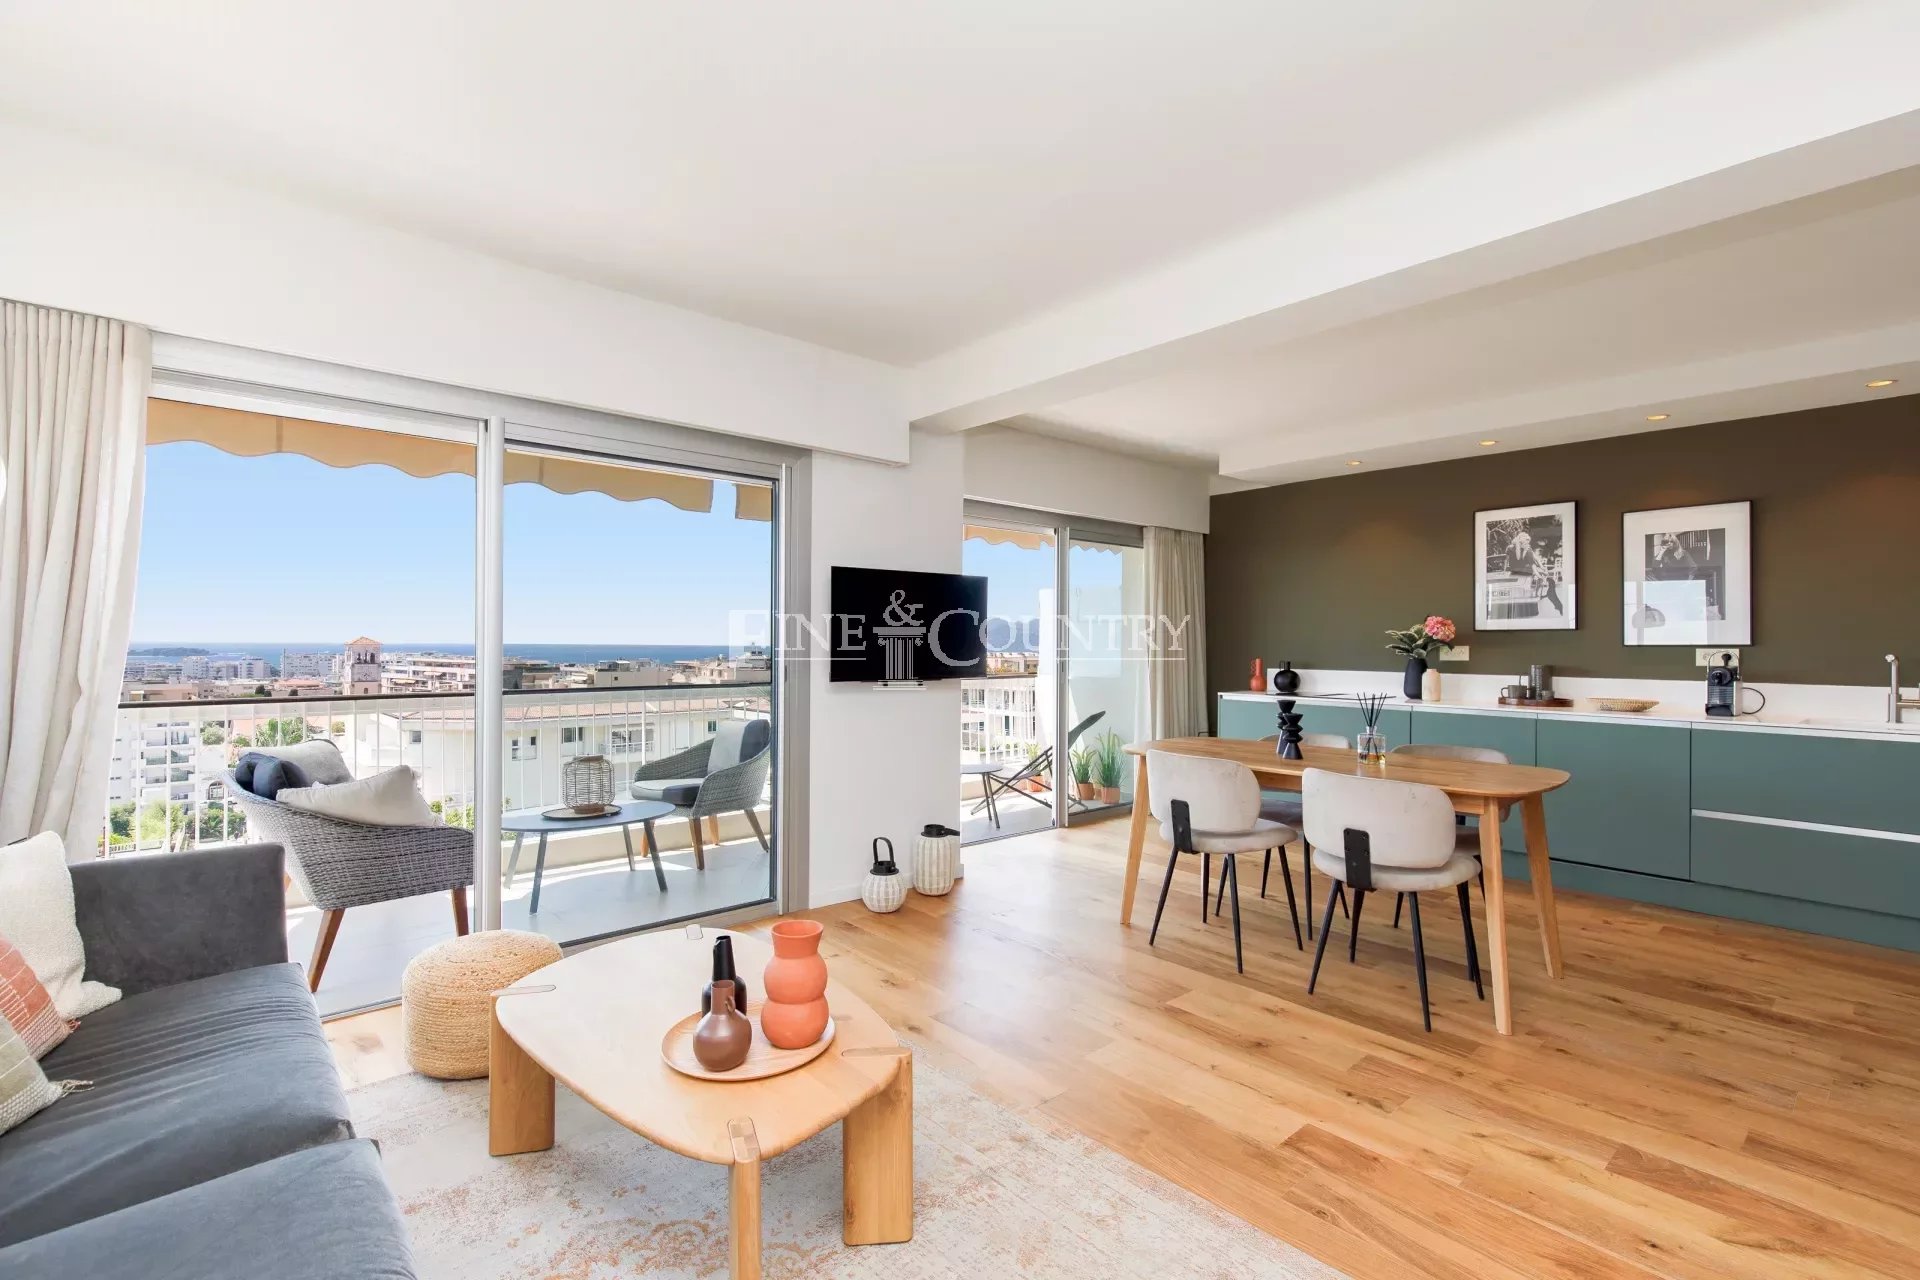 Sea View apartment for sale in Basse Californie, Cannes